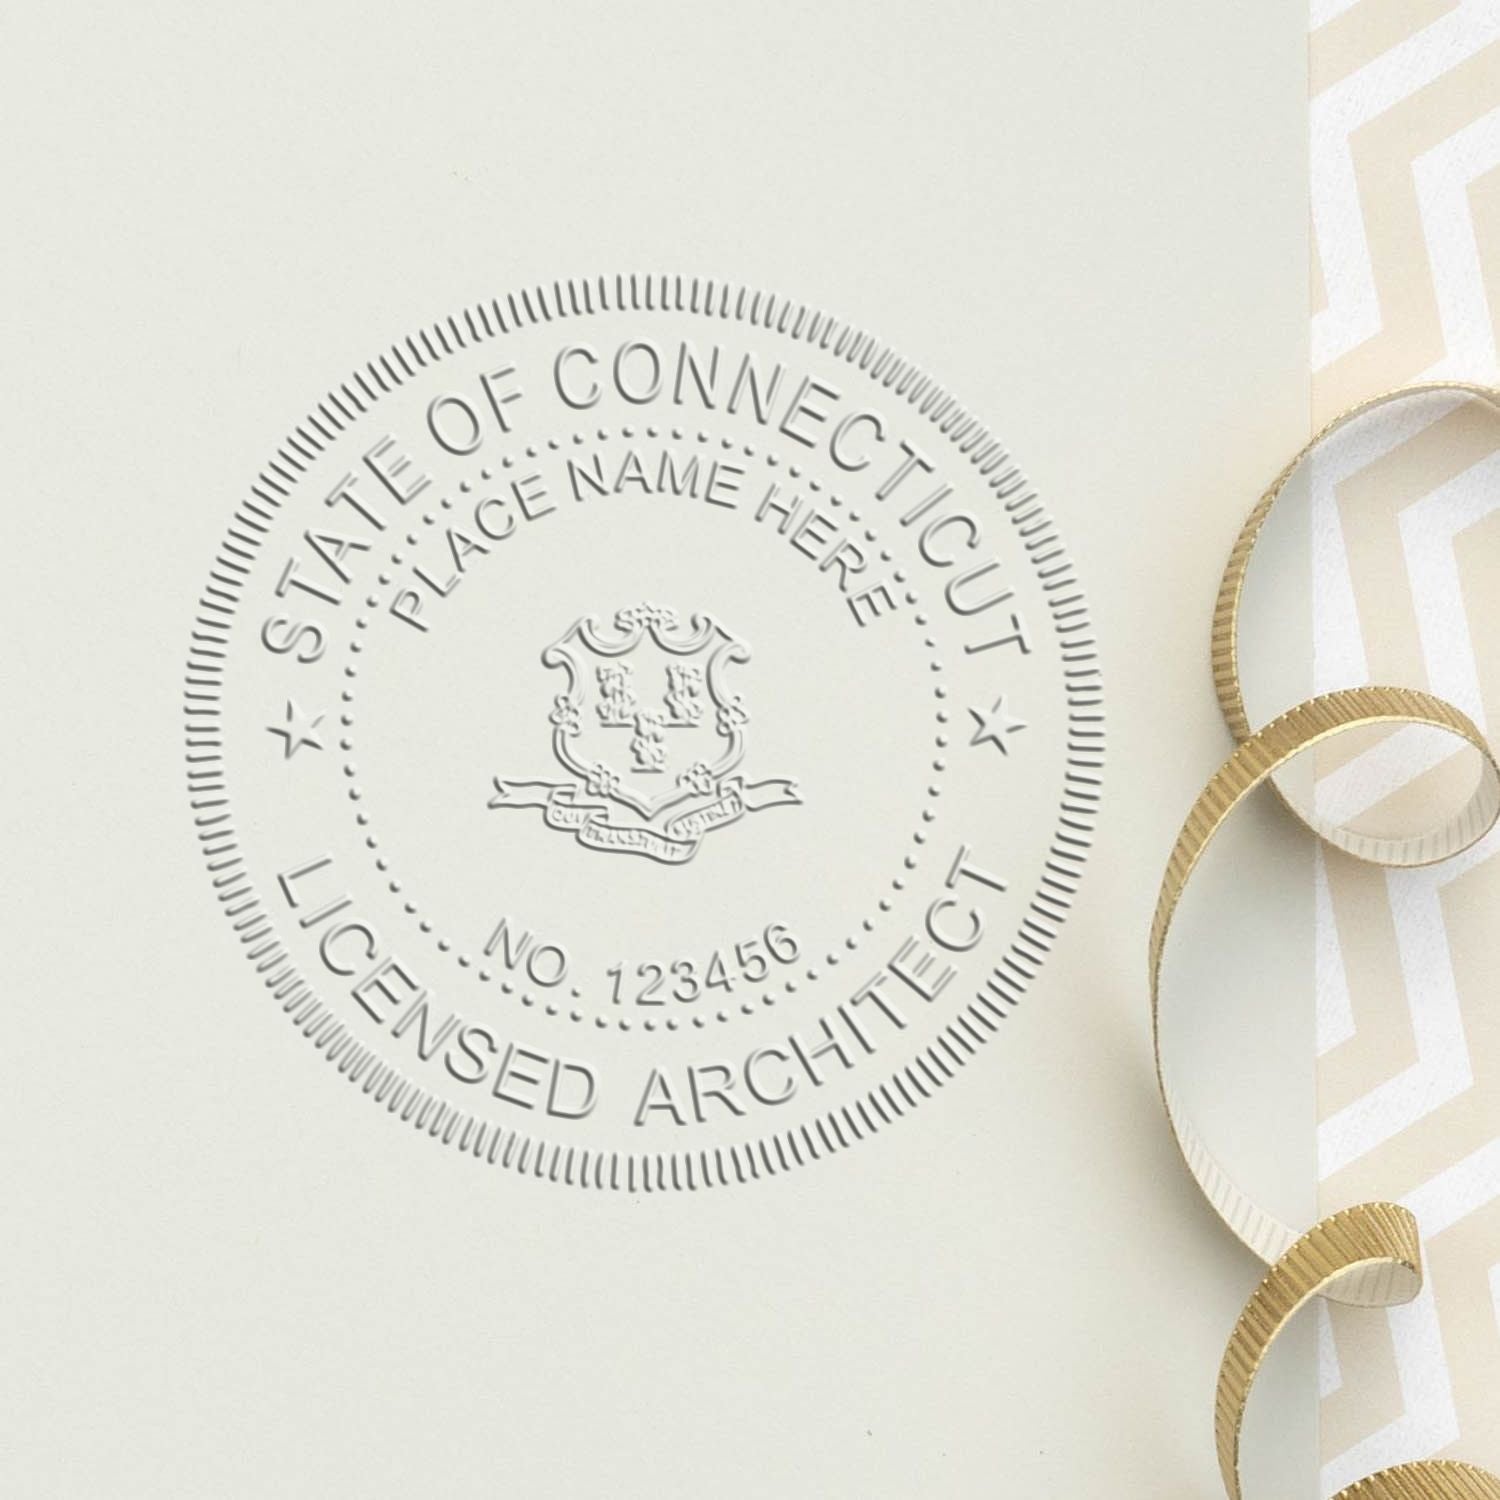 A stamped impression of the Connecticut Desk Architect Embossing Seal in this stylish lifestyle photo, setting the tone for a unique and personalized product.